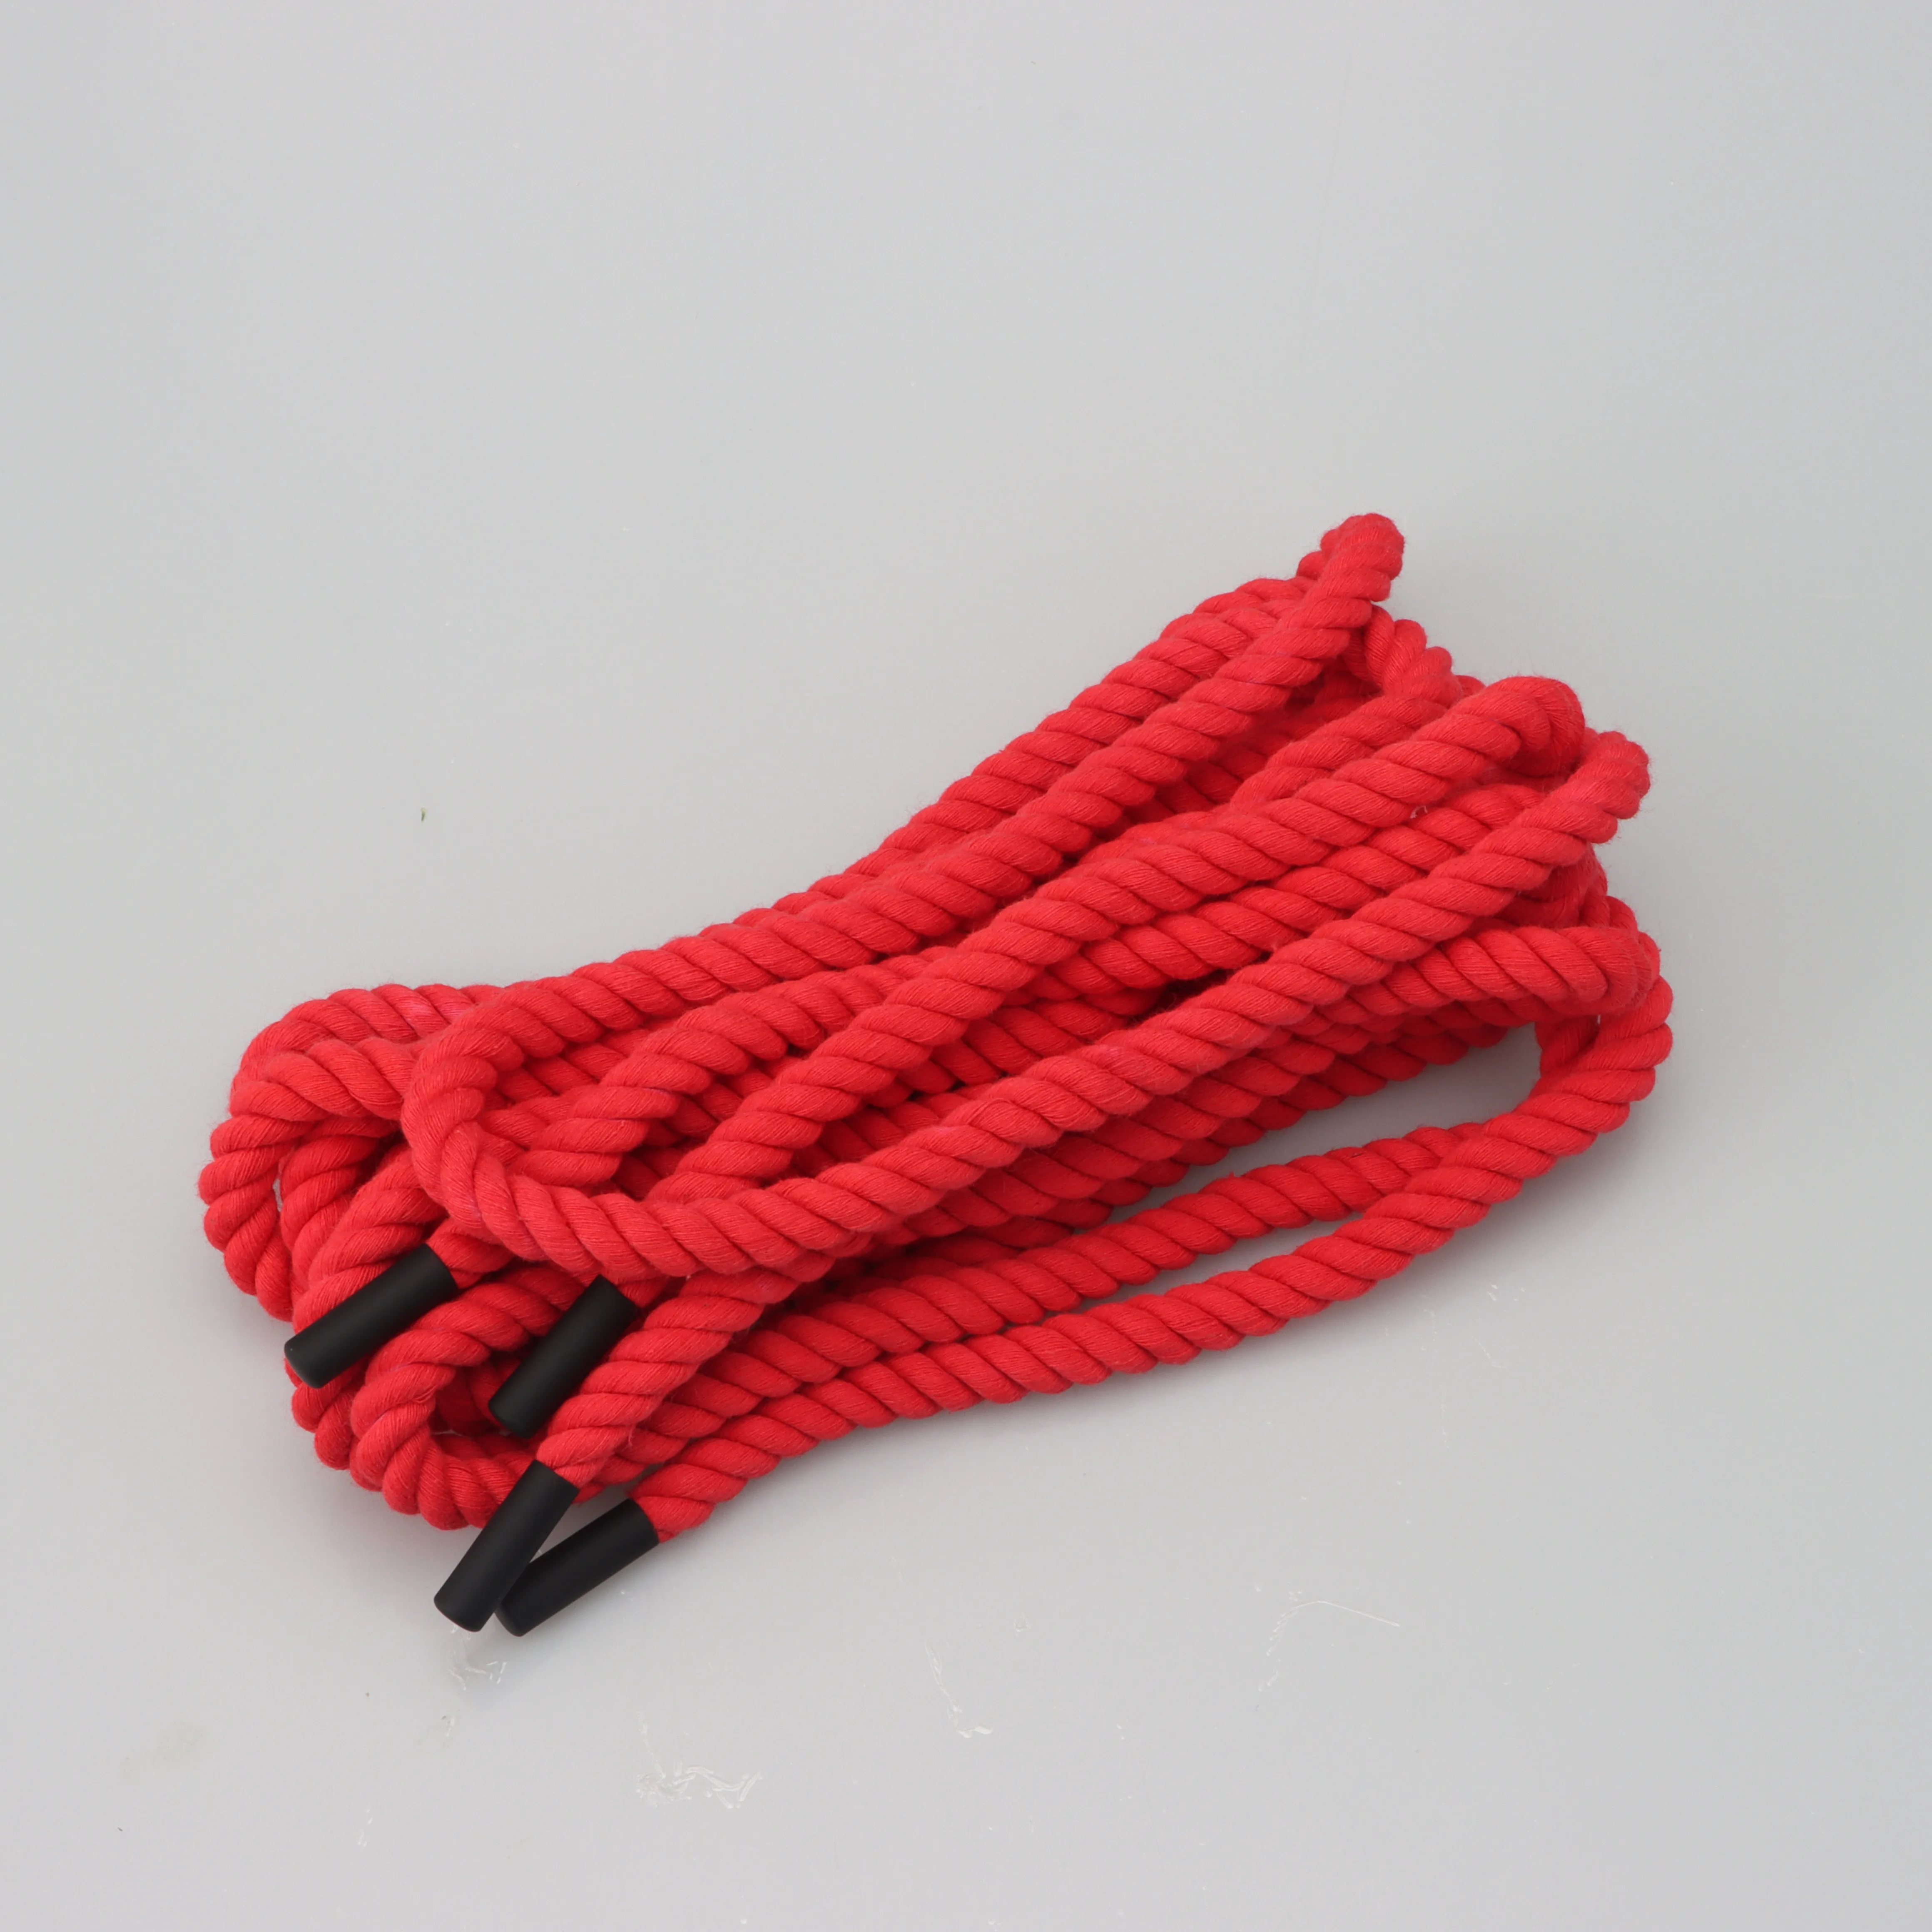 Customized Round Drawstring Thick 100% Nature Cotton Braid Shoelaces Rope Twisted Shoe Laces